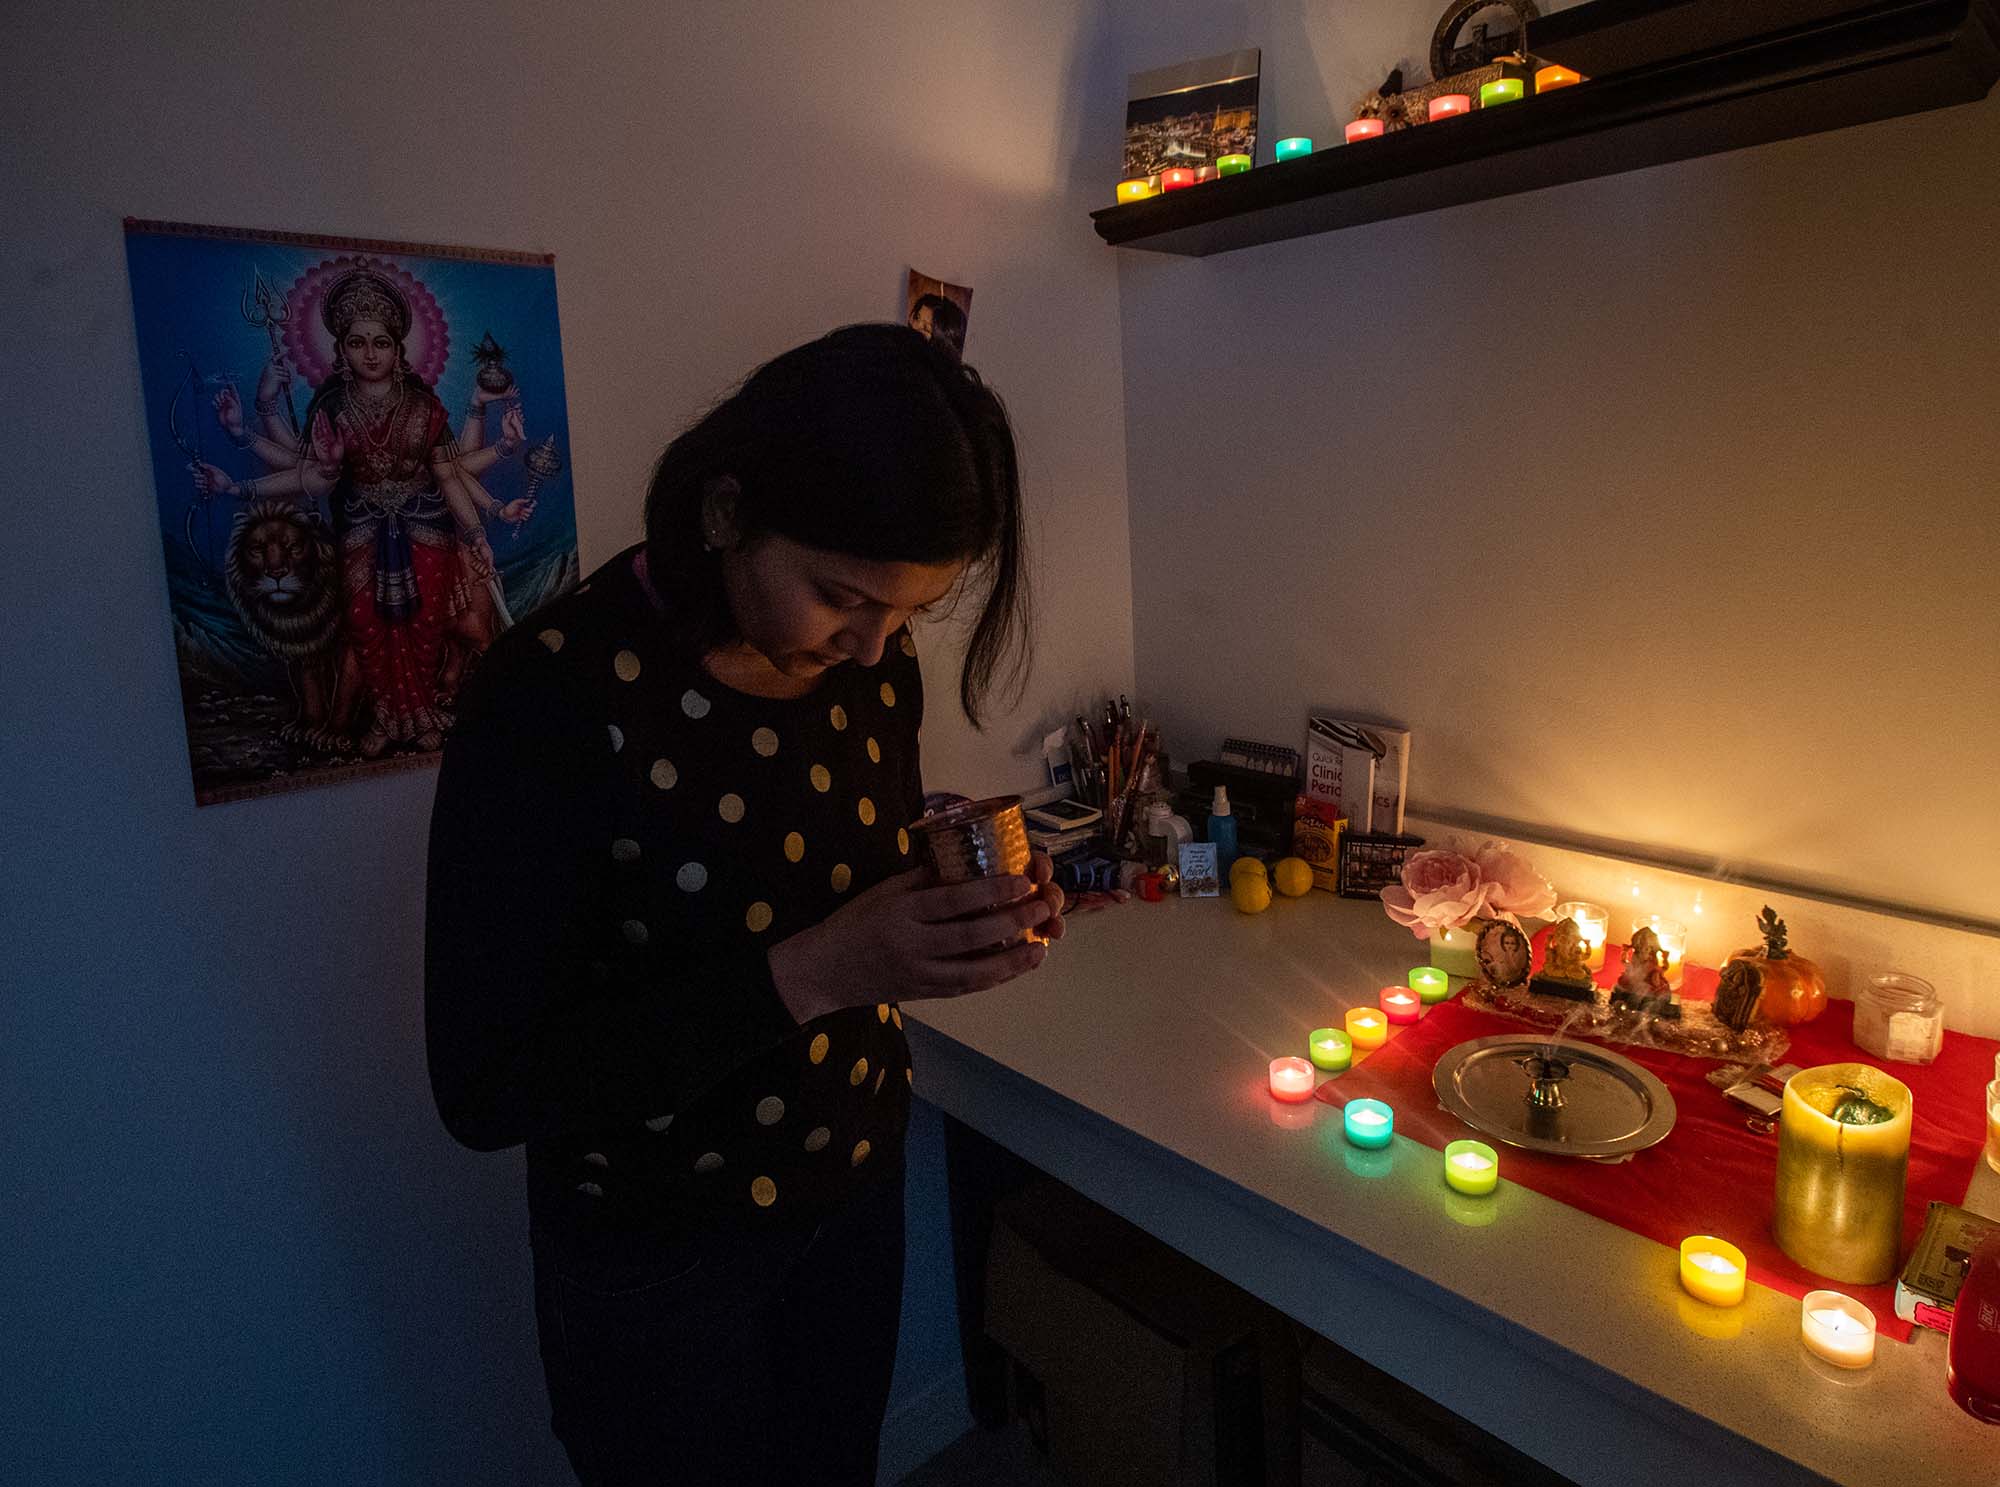 Photo of Swati Gupta (GSDM’23), a brown woman with neck-length black hair, in her prayer/meditation space in her Boston home. She holds a cup made of copper and has head bowed as multi-colored candles are lit in the space.